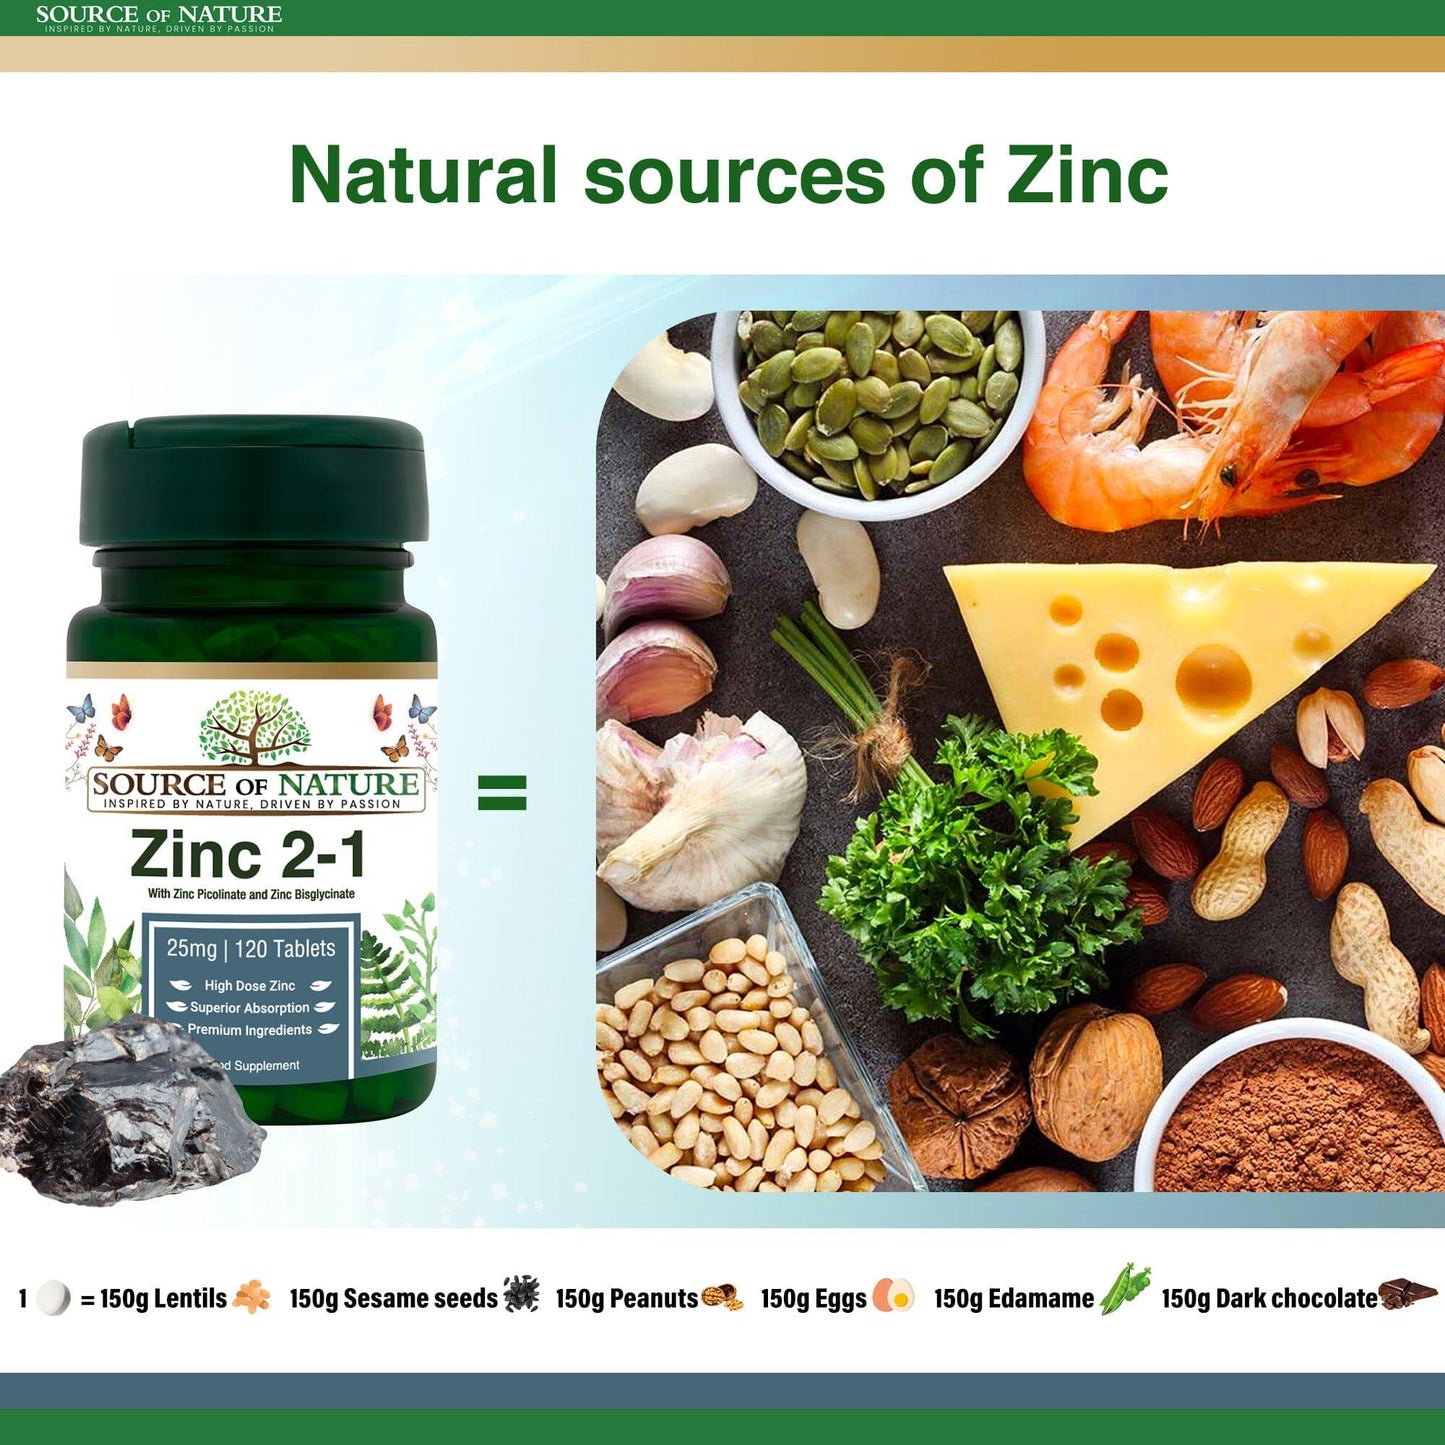 2-in-1 Zinc 25mg | 120 Tablets | 4-Month-Supply - Source of Nature